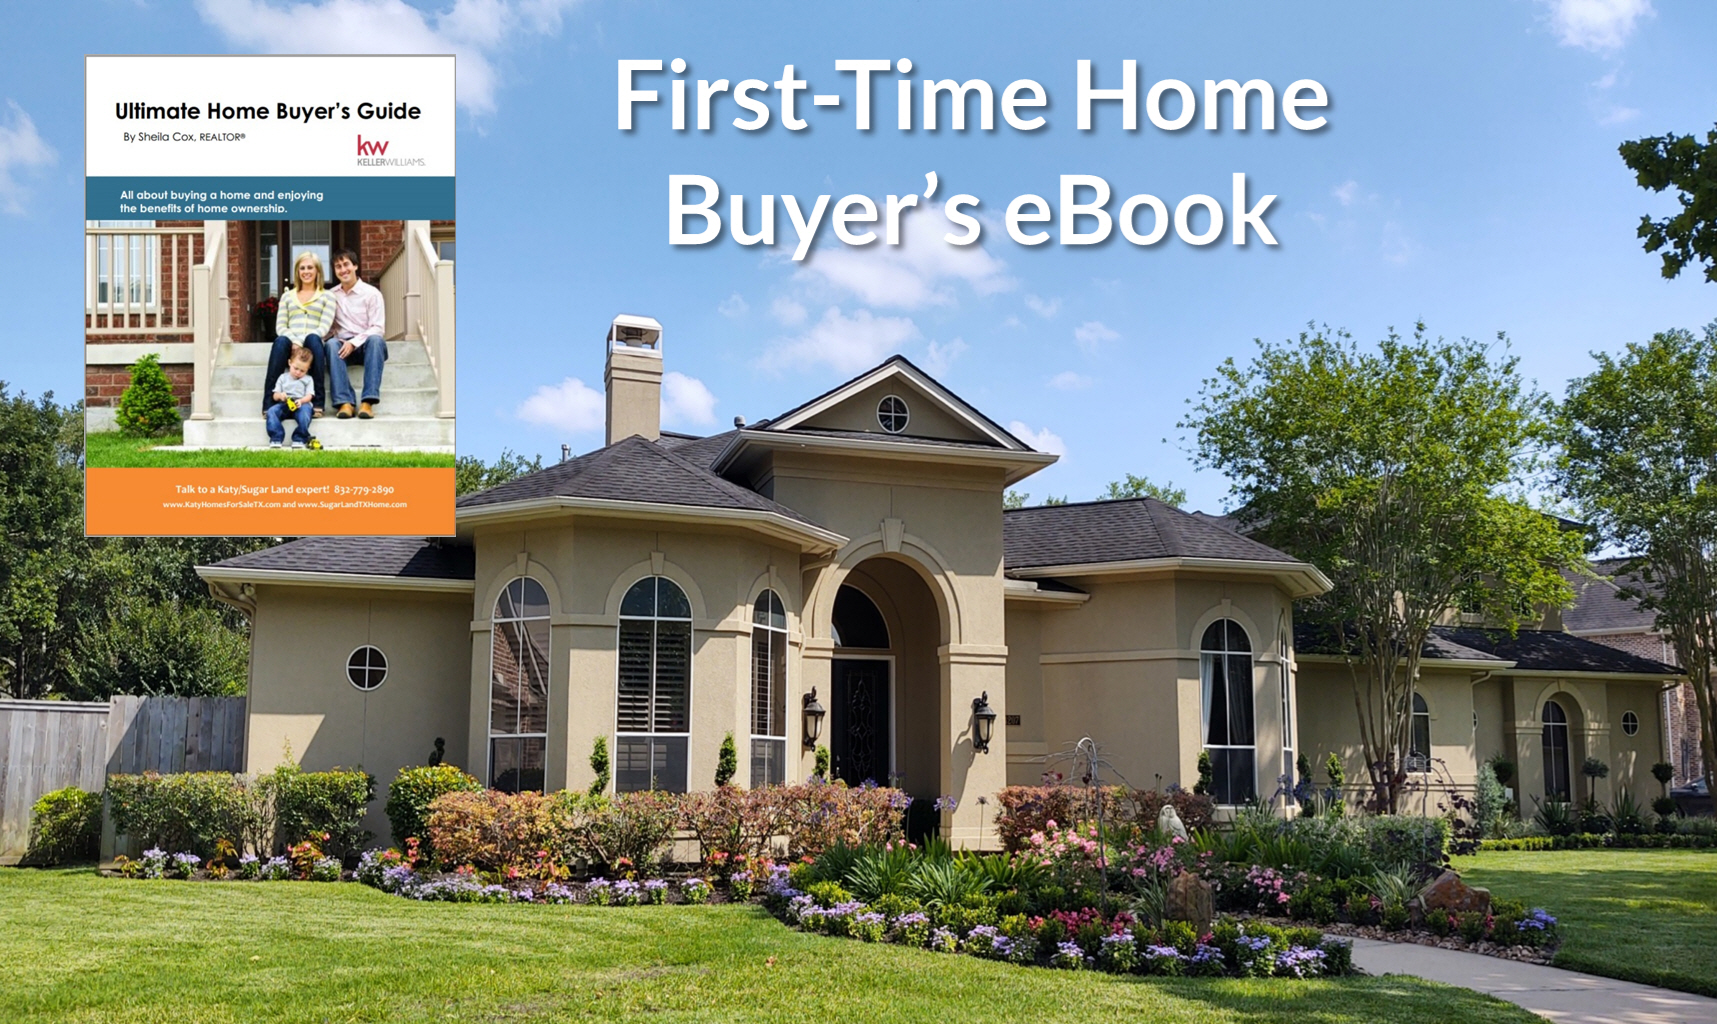 home buyers guide